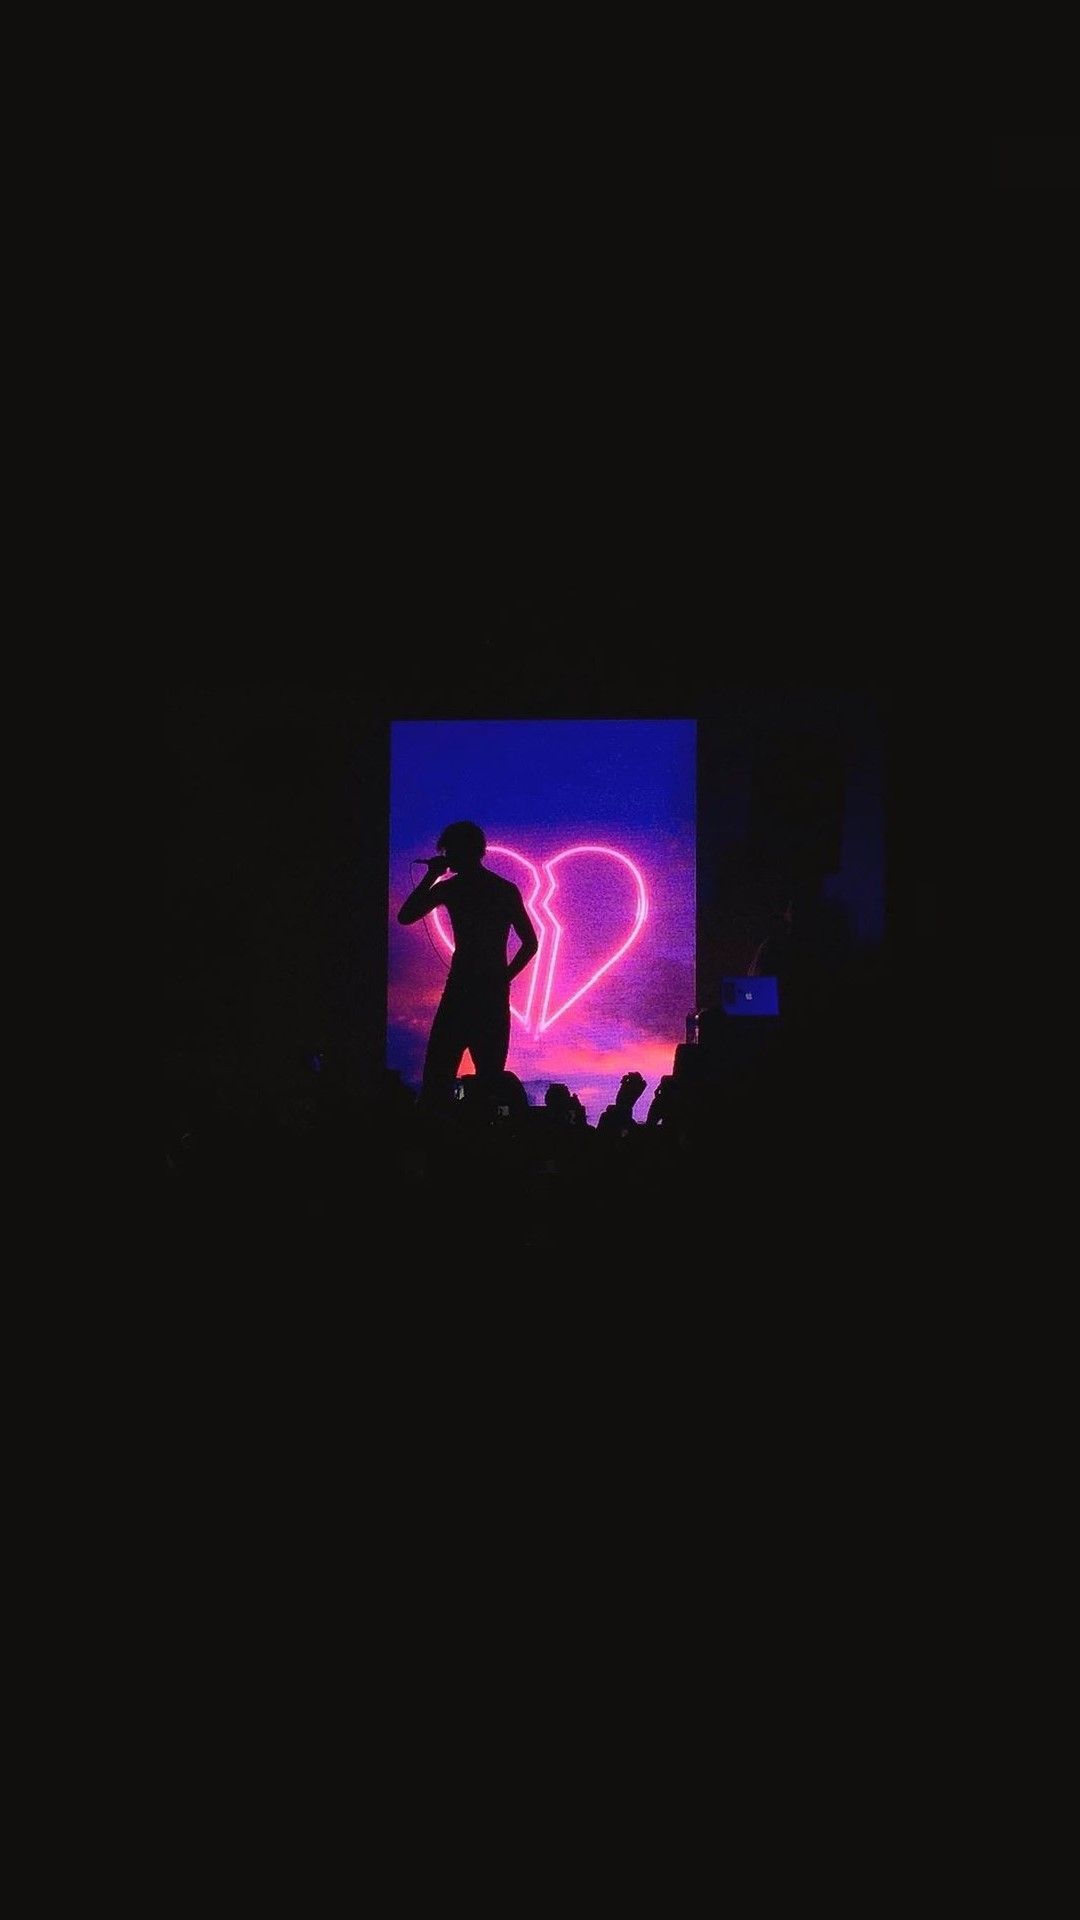 IPhone wallpaper of The Weeknd performing on stage with a neon heart behind him. - Lil Peep